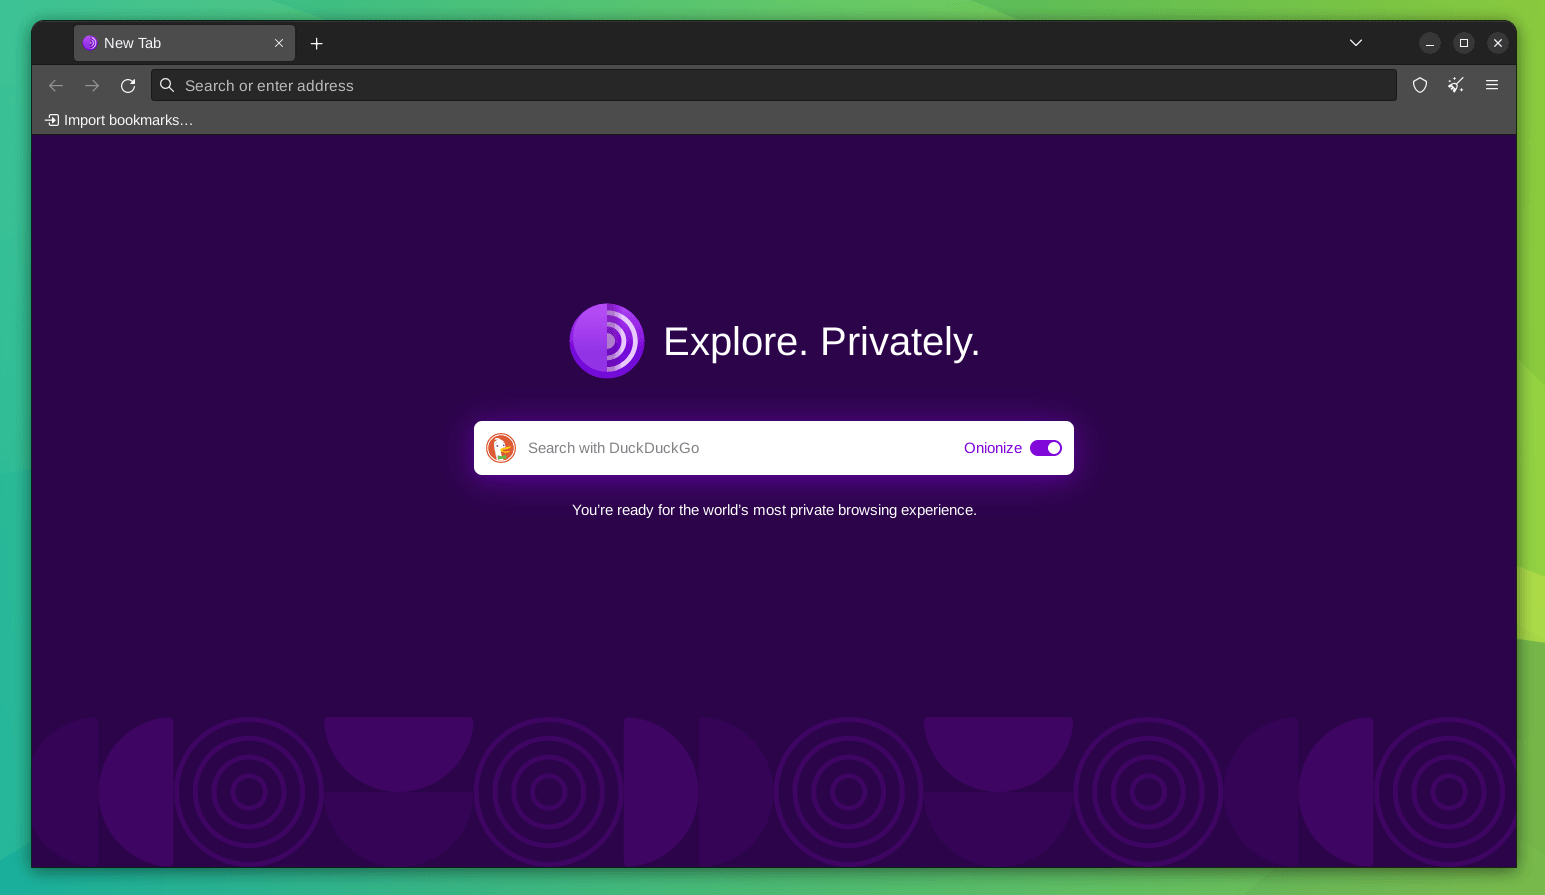 a screenshot of tor browser 13.0 updated homepage with the onionize duckduckgo feature enabled